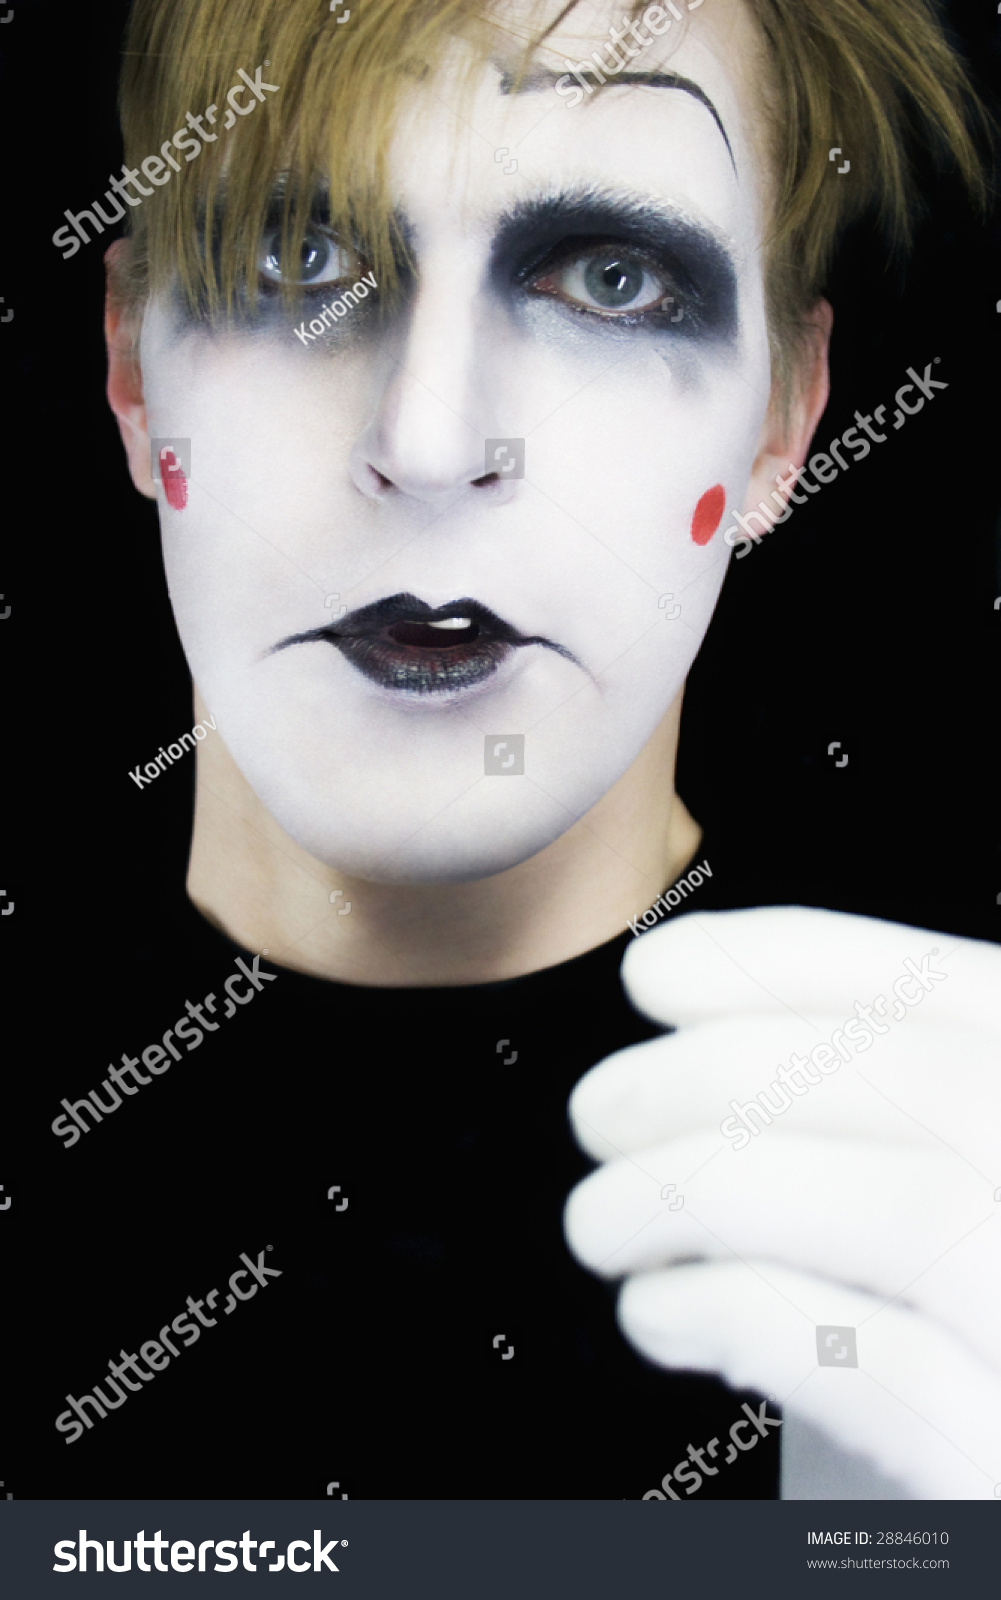 Portrait Of The Mime In Gothic Style Stock Photo 28846010 : Shutterstock